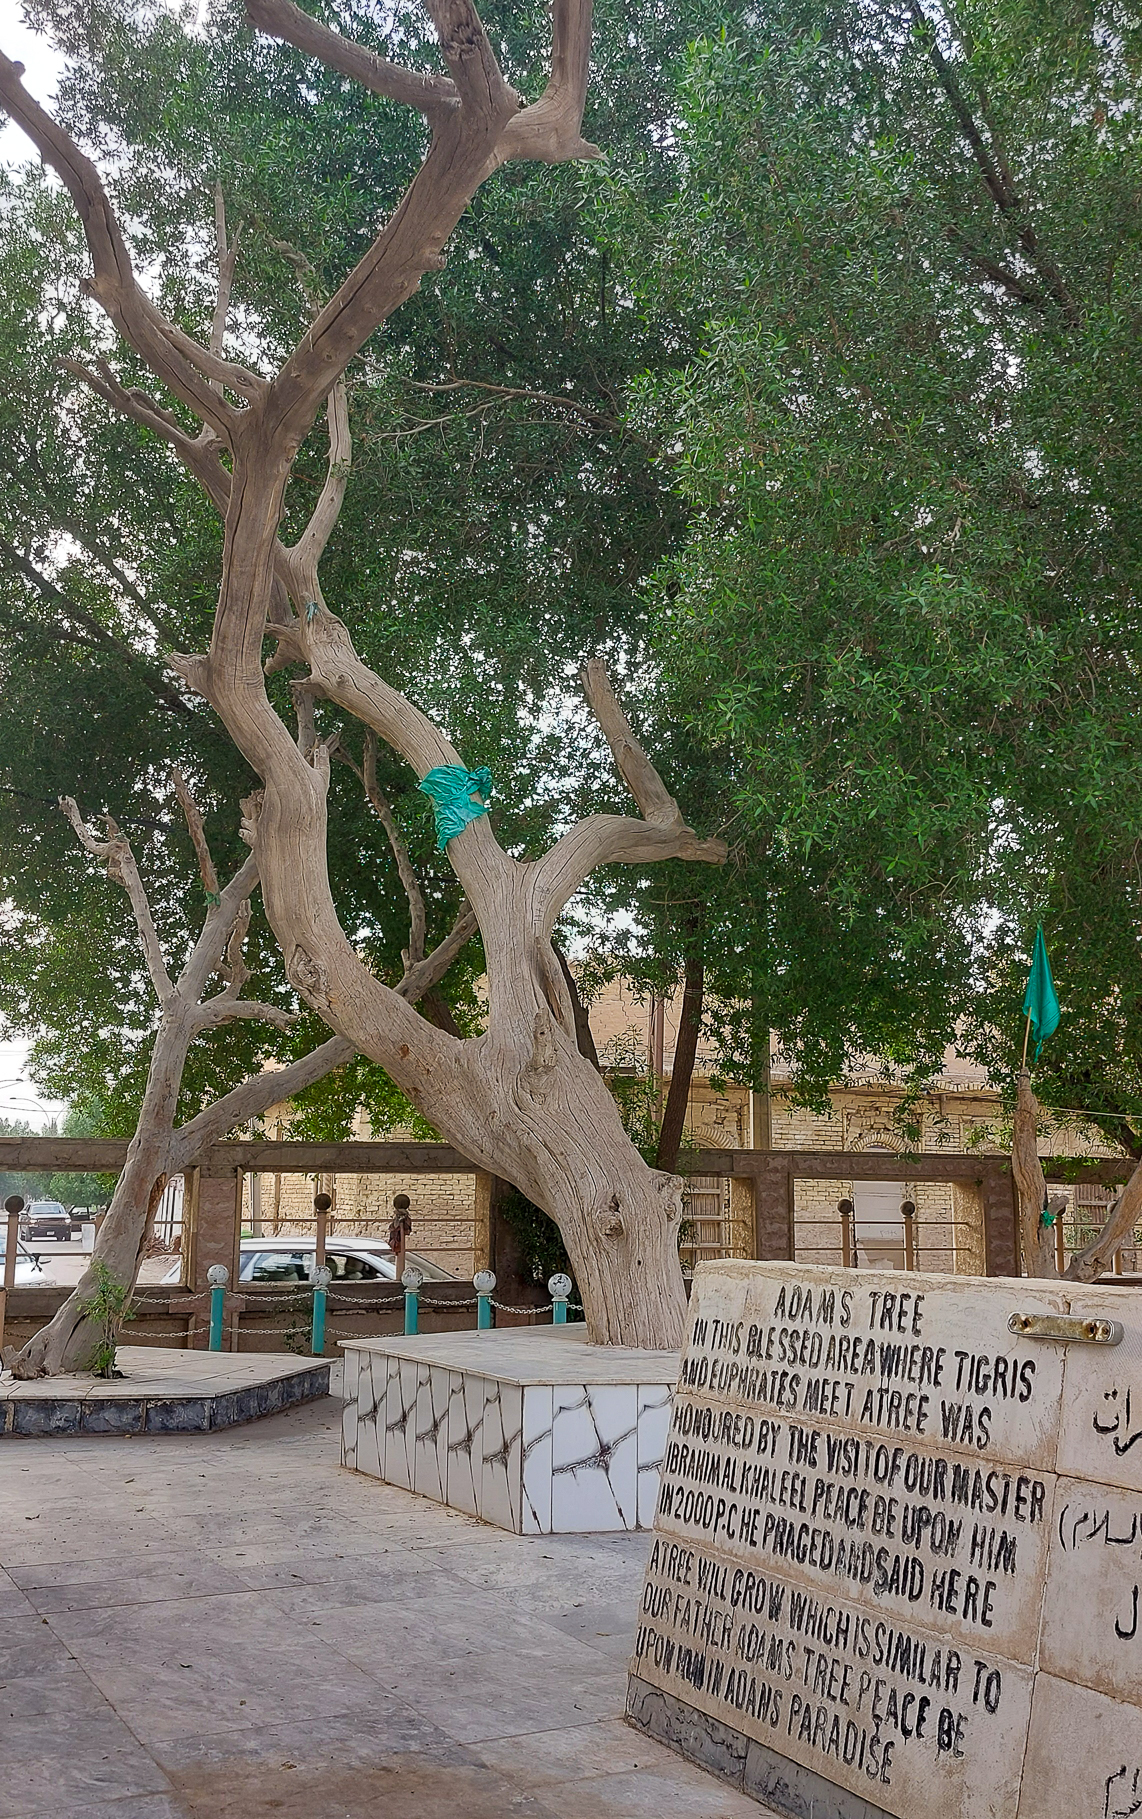 <span  class="uc_style_uc_tiles_grid_image_elementor_uc_items_attribute_title" style="color:#ffffff;">The Tree of Knowledge in El Qurna</span>